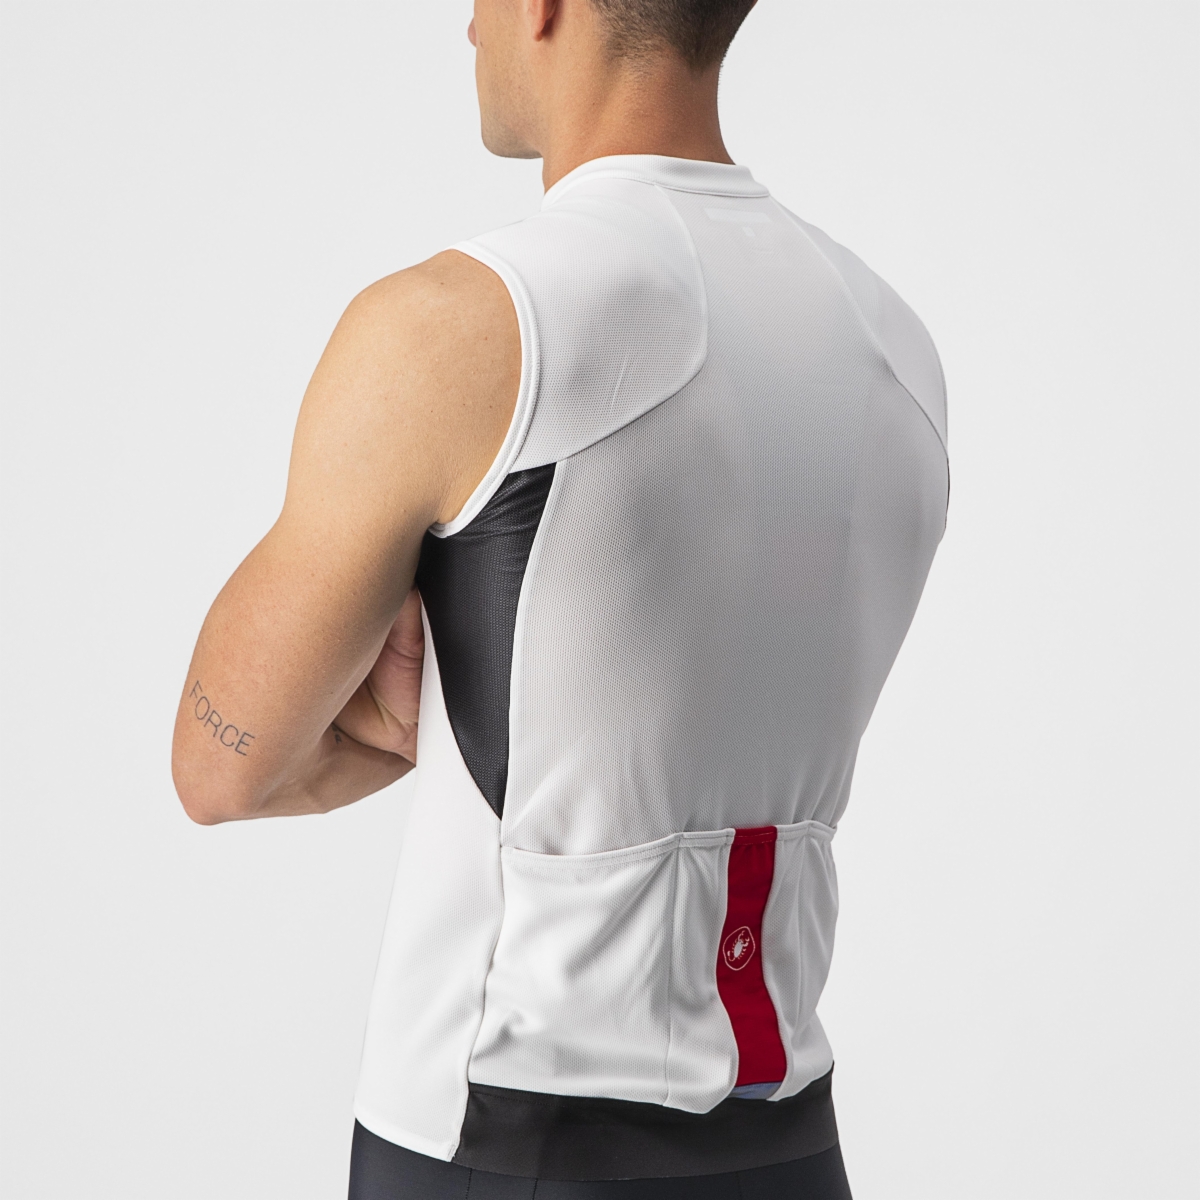 Sleeveless Cycling Jerseys for Sale